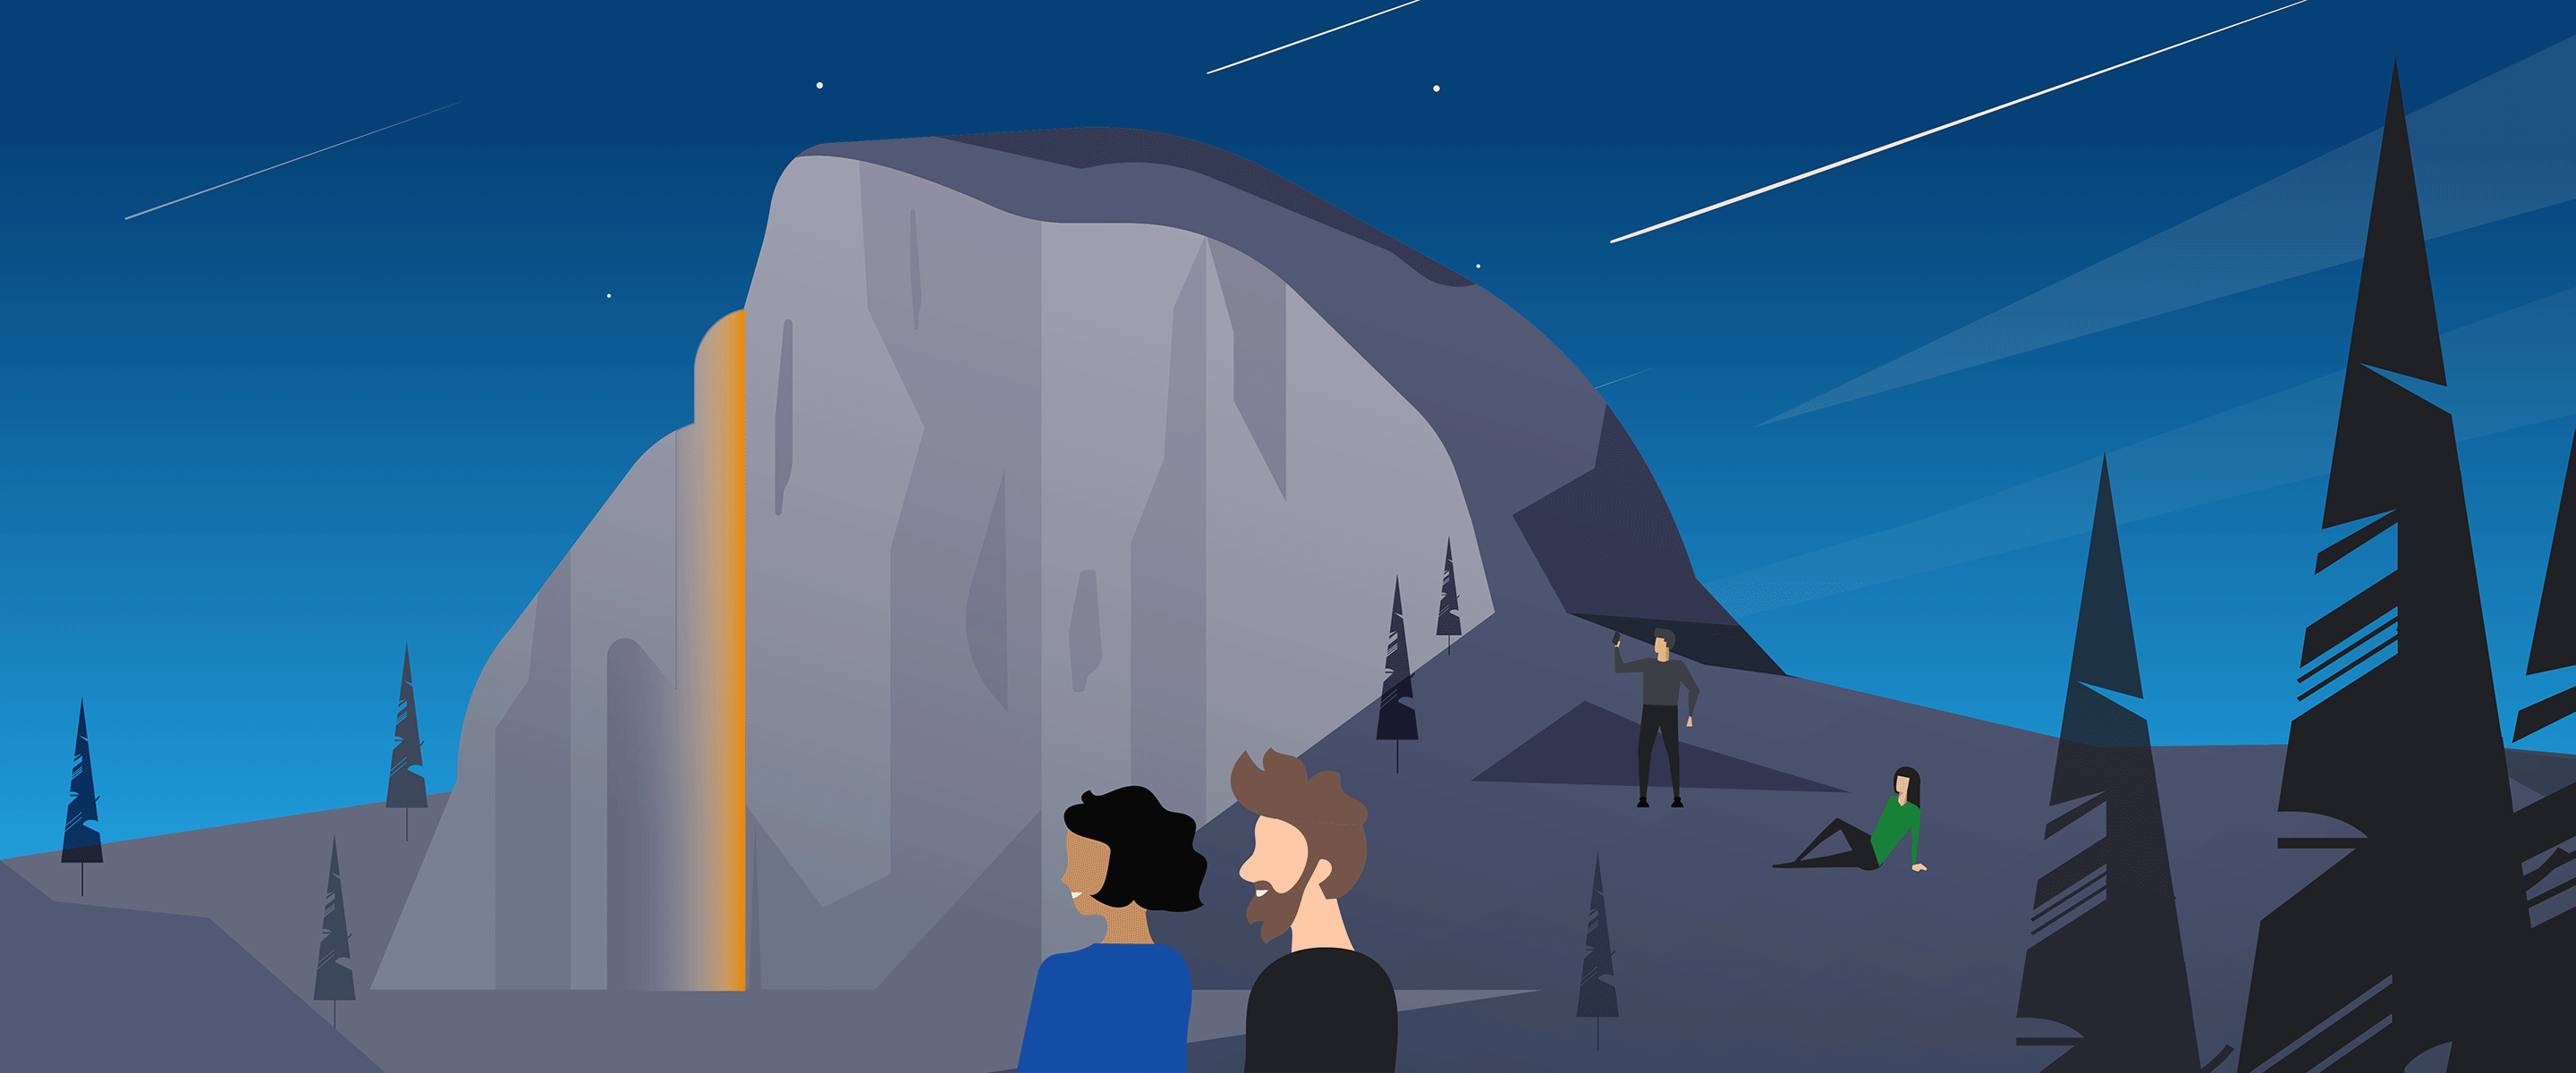 An animated gif of an illustration of mountain and silhouetted trees. The sky shows that it’s dusk. There’s an illuminated waterfall on the side of the mountain. Various people flash in and out of the image as a representation of how Magic Eraser can work